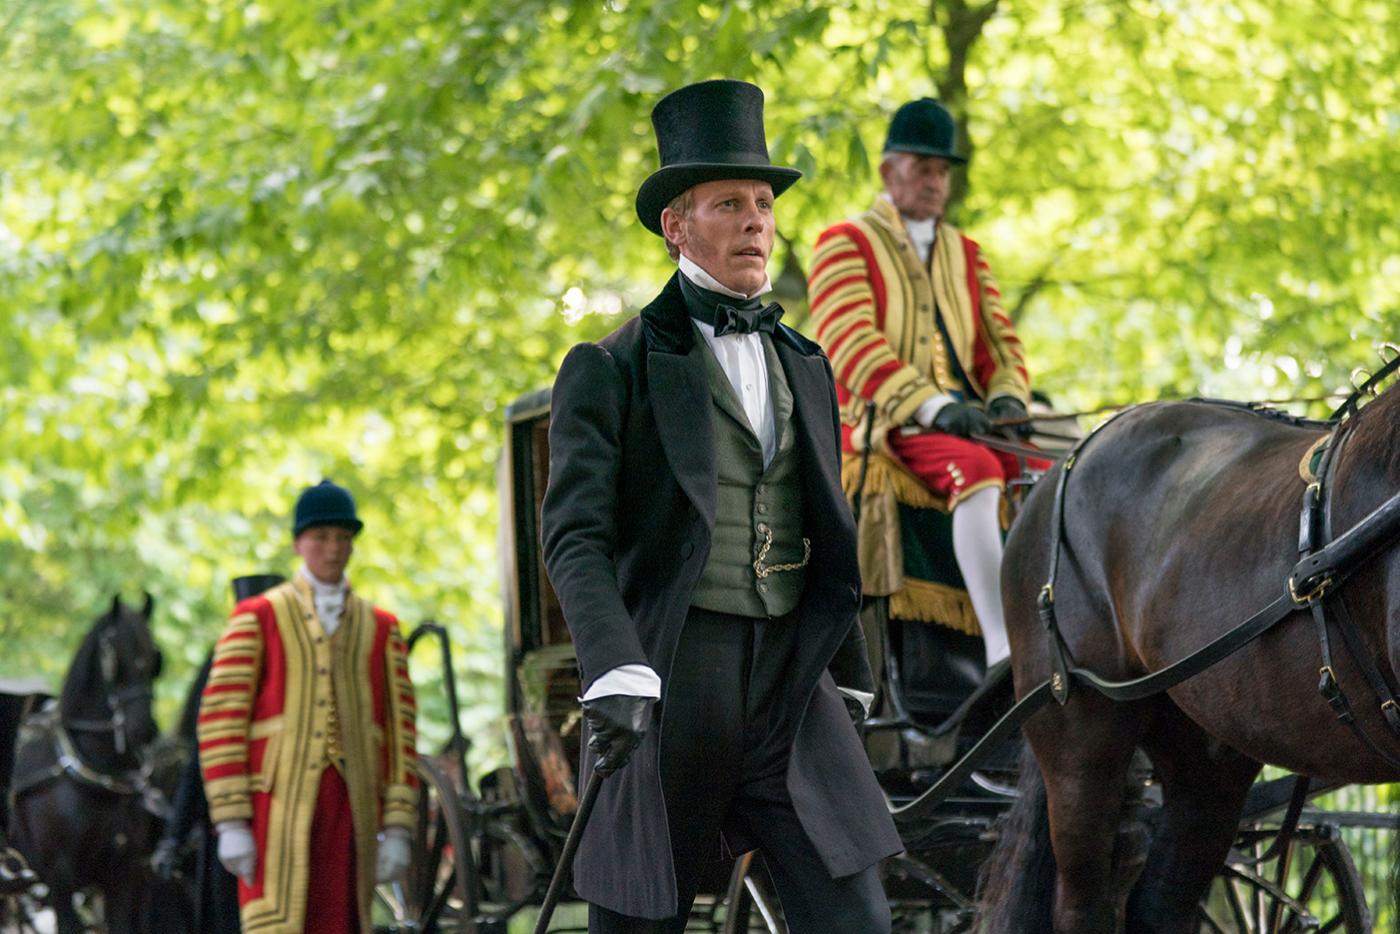 Laurence Fox as Lord Palmerston in Victoria. Photo: Aimee Spinks/ITV Plc for MASTERPIECE